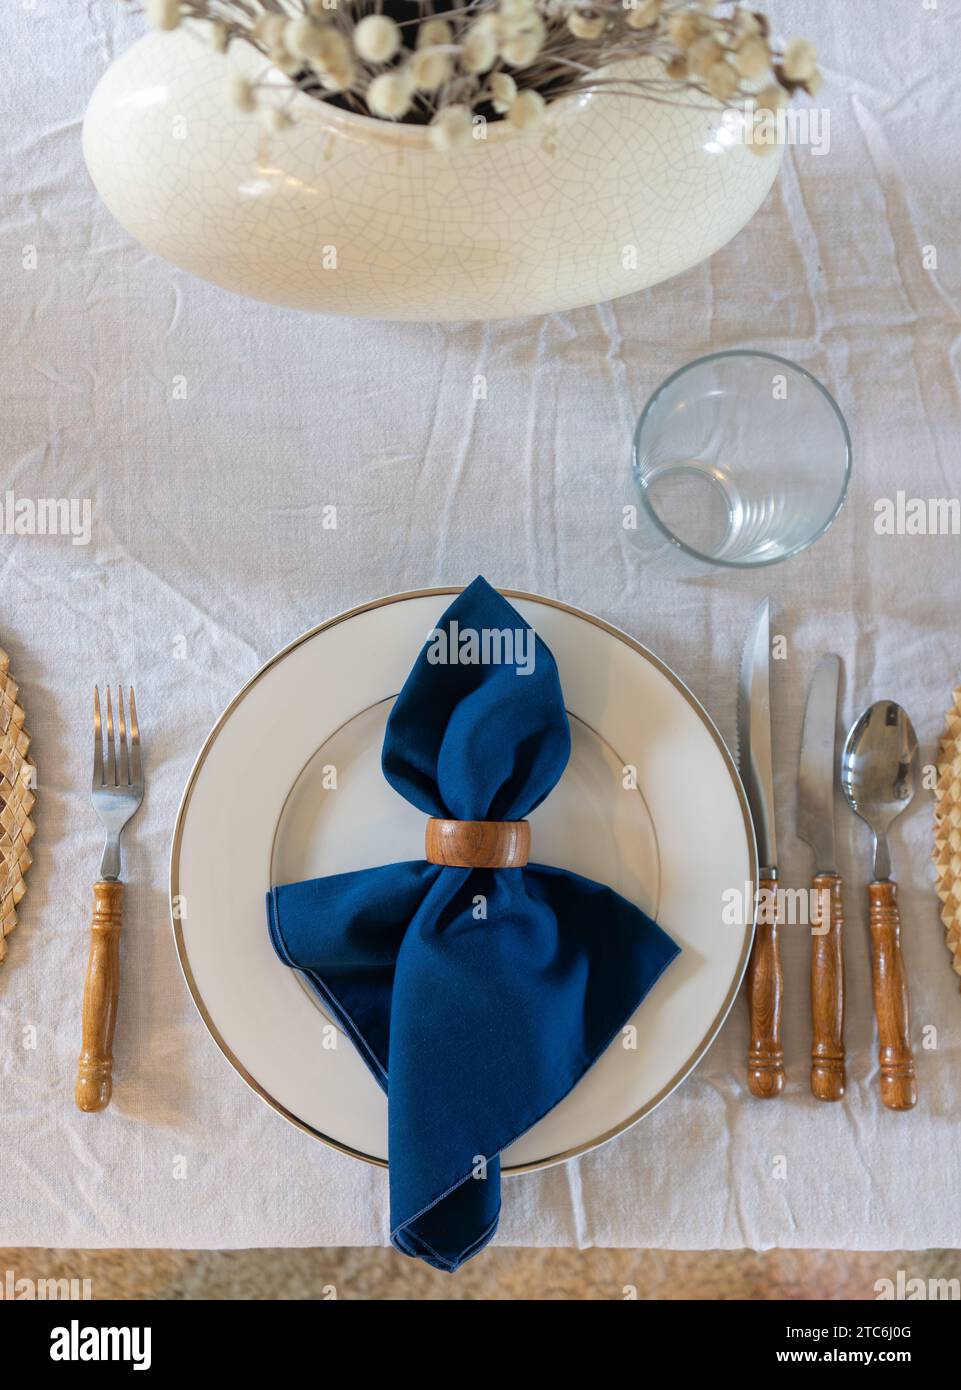 Festive white and royal blue table setting with wooden accents Stock Photo